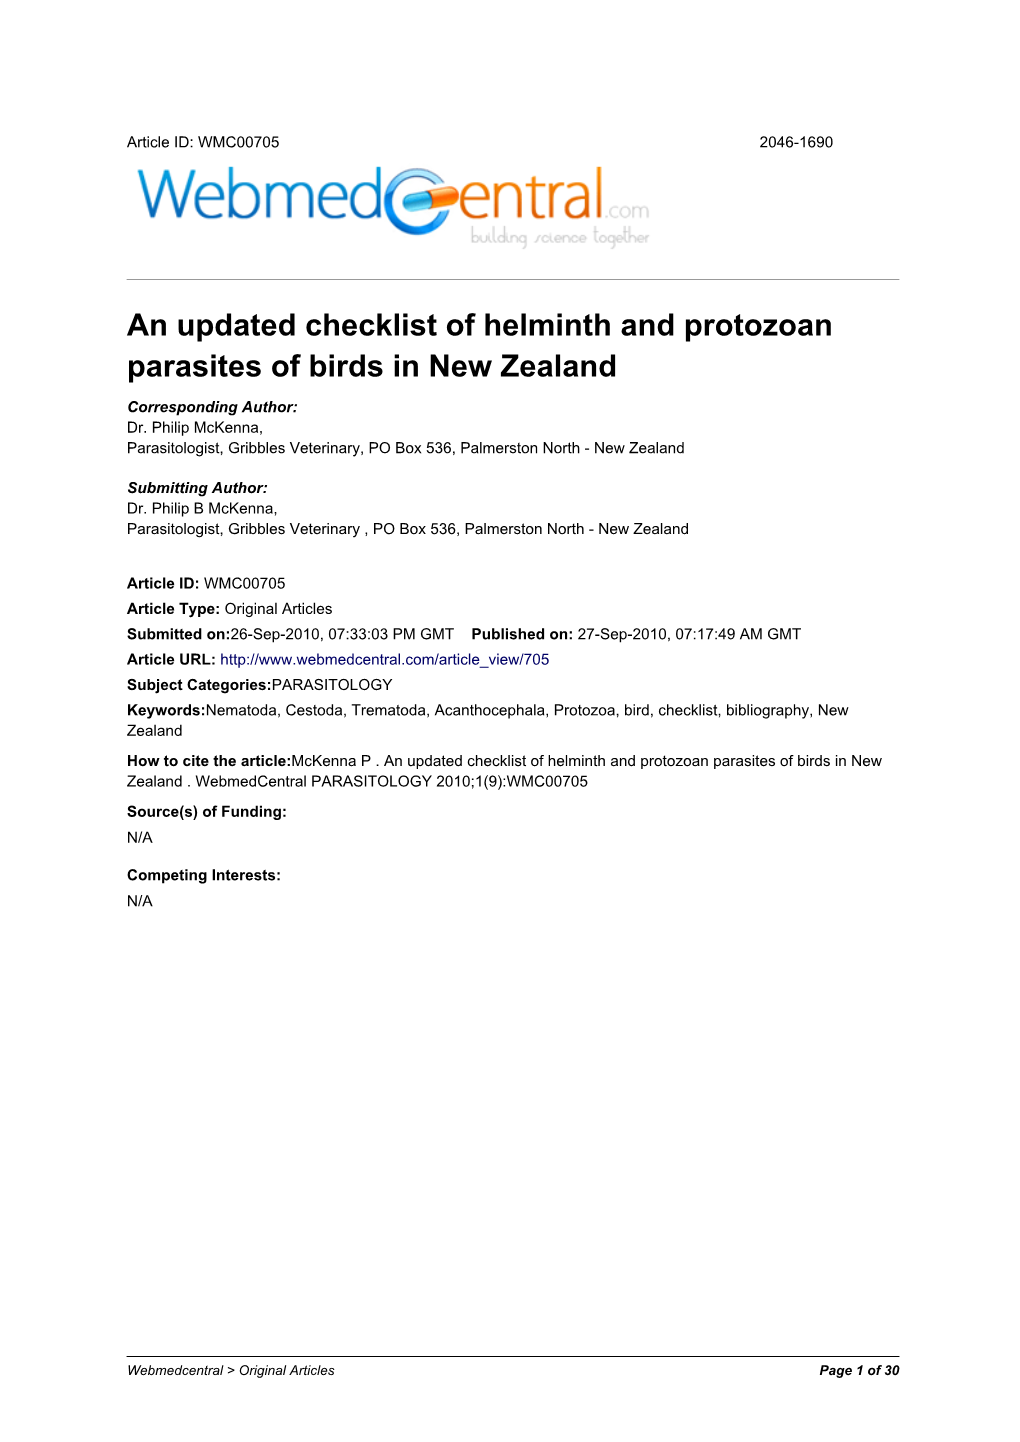 An Updated Checklist of Helminth and Protozoan Parasites of Birds in New Zealand